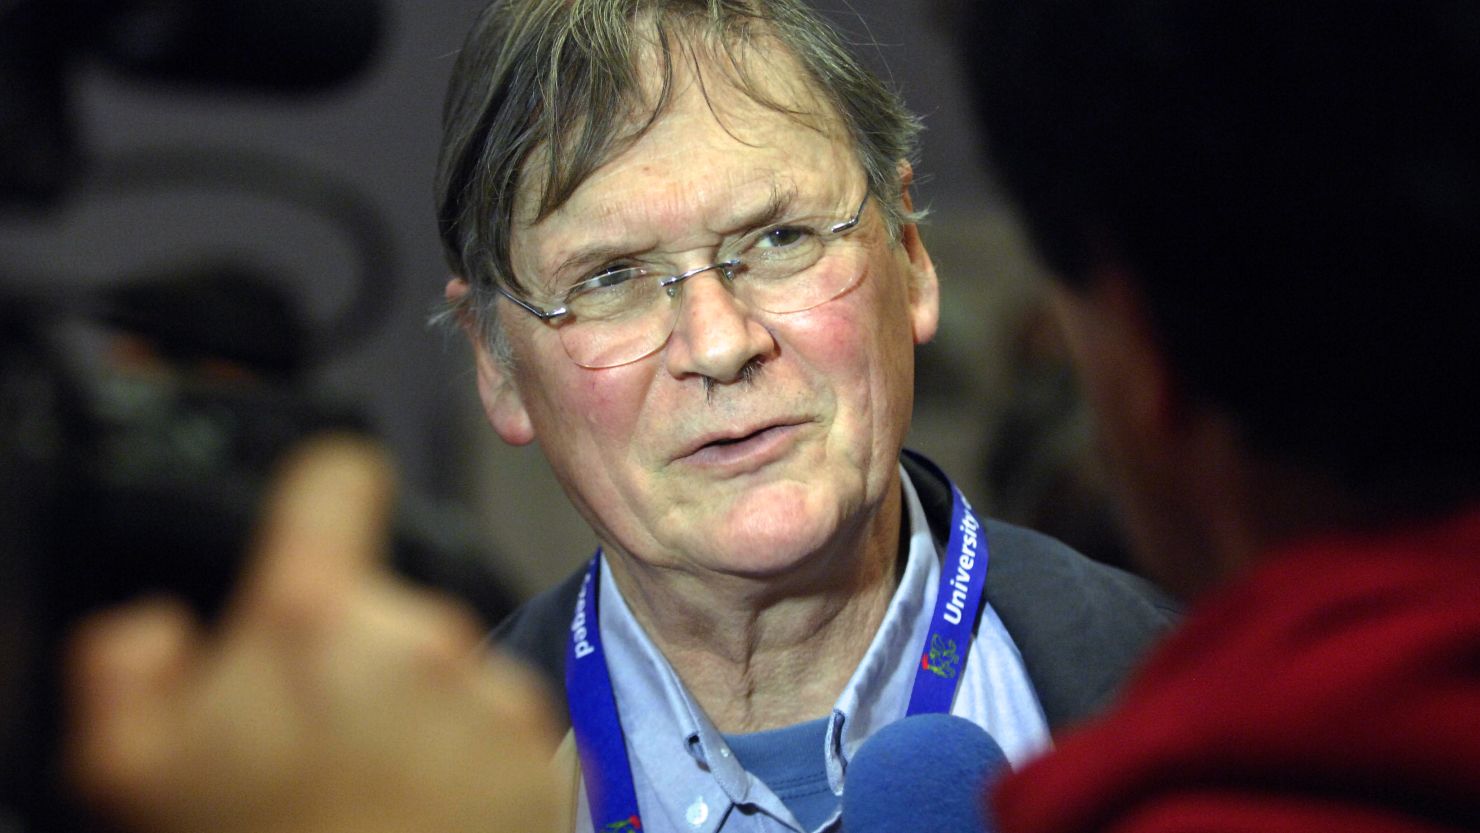 Sir Tim Hunt, a scientist and Nobel Prize winner, apologized after suggesting that women in science labs "fall in love with you and when you criticize them, they cry."